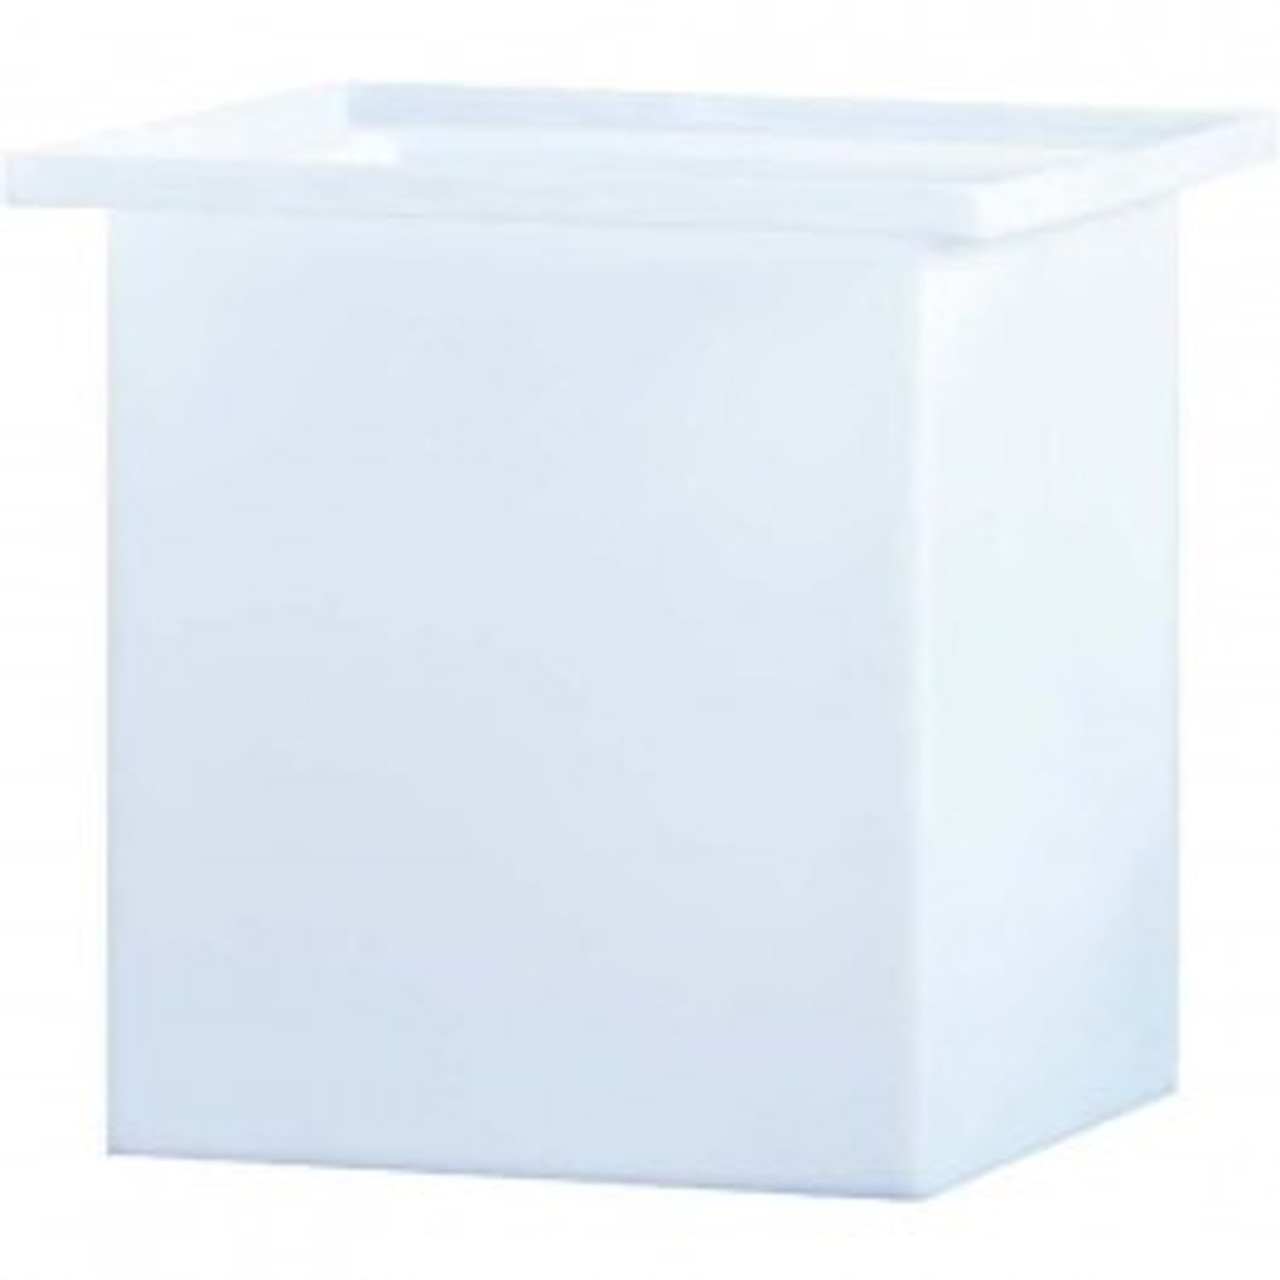 An image of a 70 Gallon PP Chem-Tainer White Rectangular Open Top Tank | R183030B